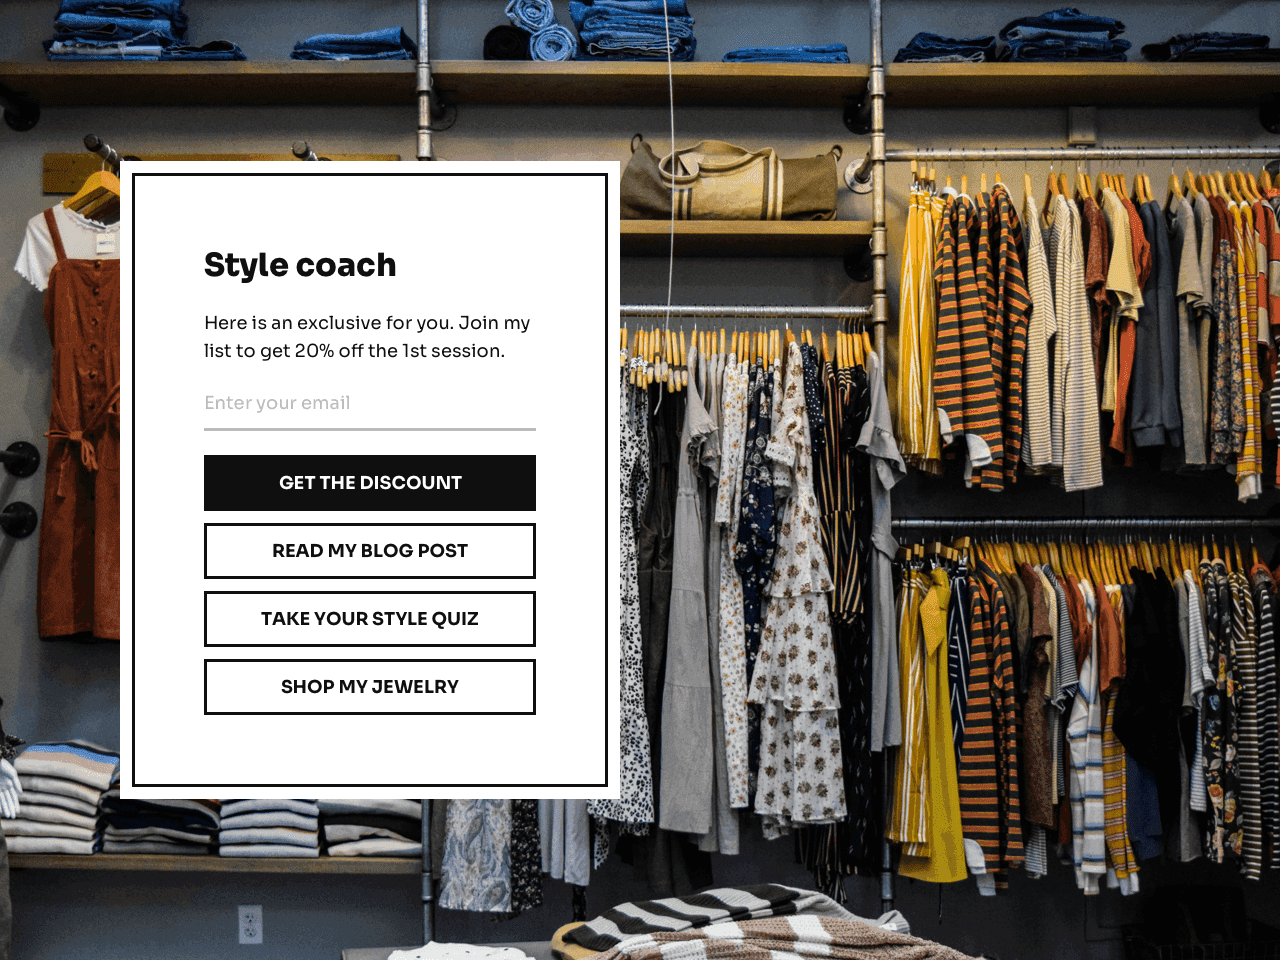 Instagram landing page for a style coach powered by Getform